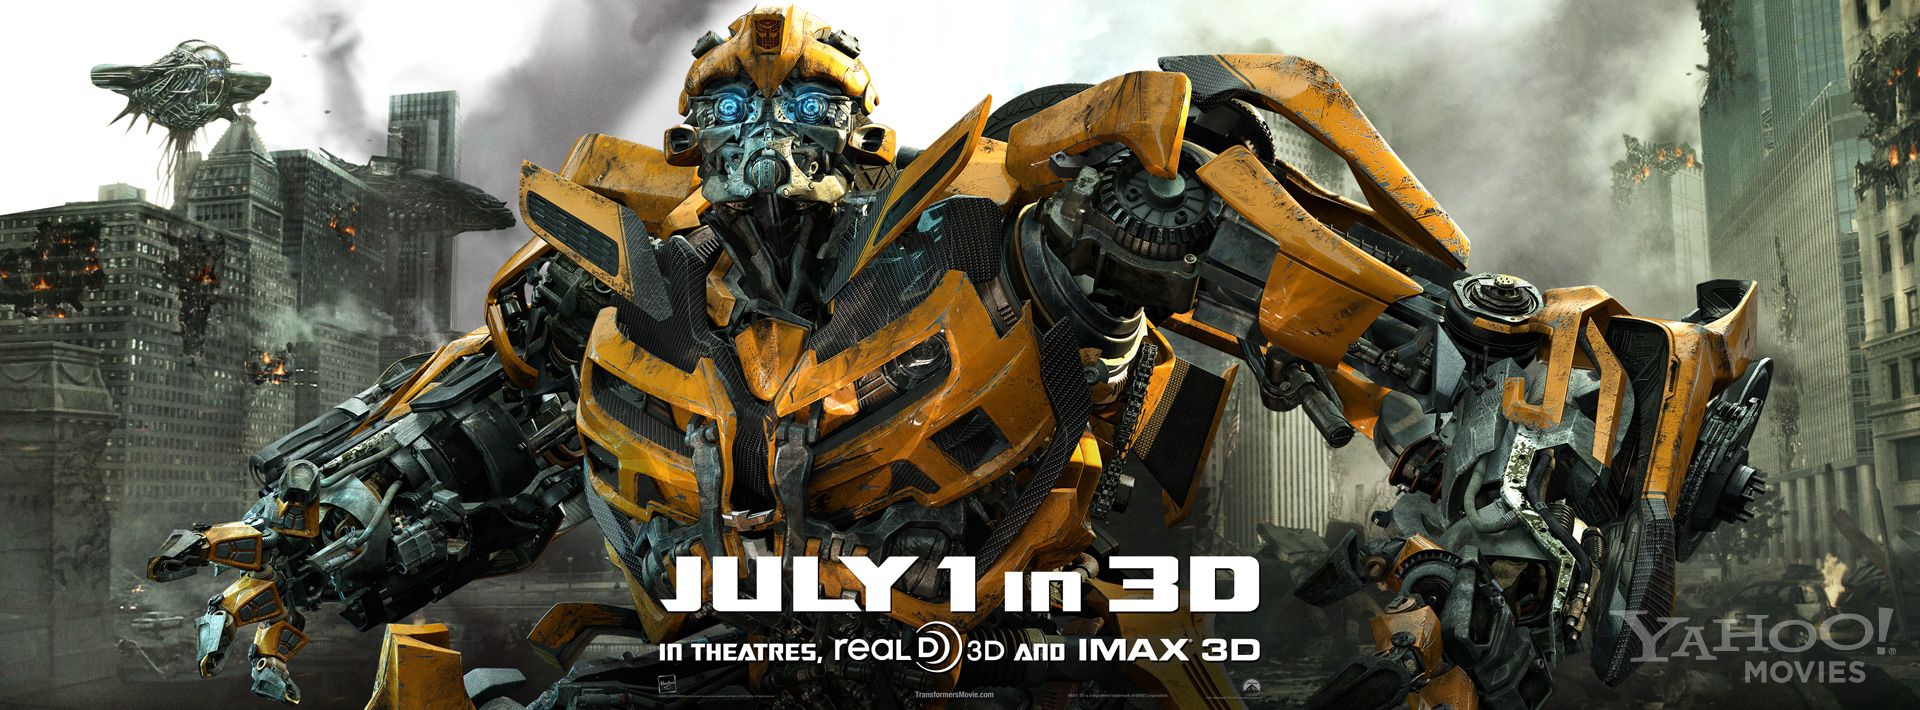 Bumblebee Gets New Poster for Transformers: Dark of the Moon